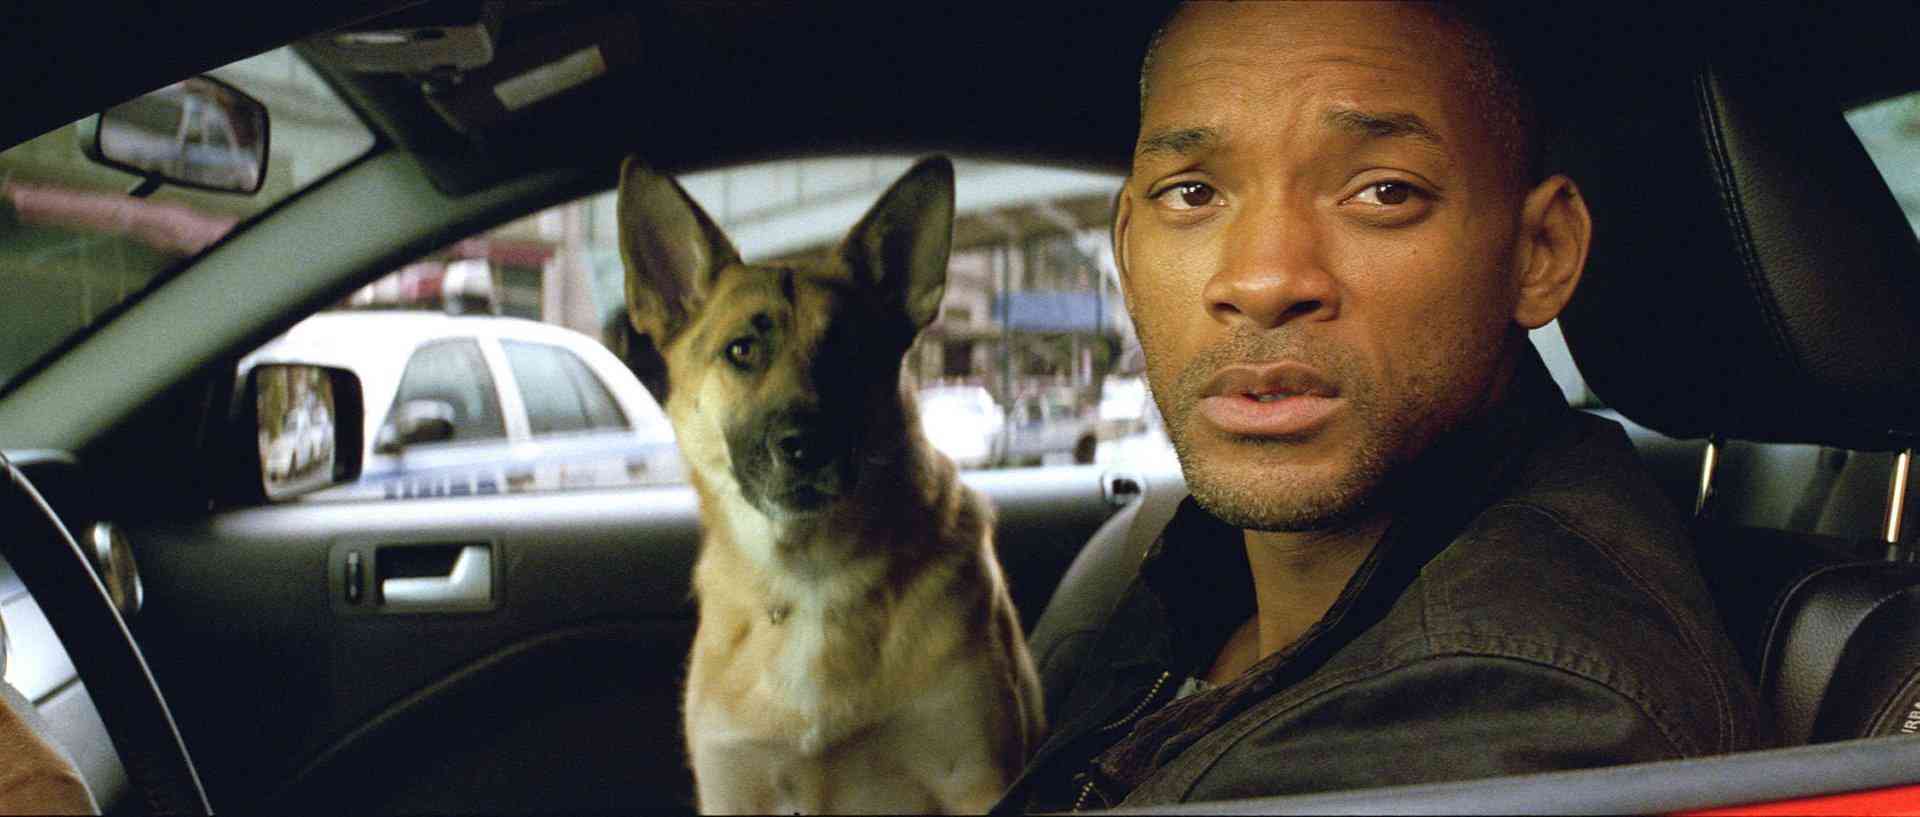 Warner Bros. continues to 'use talent' when retaining Will Smith in I Am Legend 2